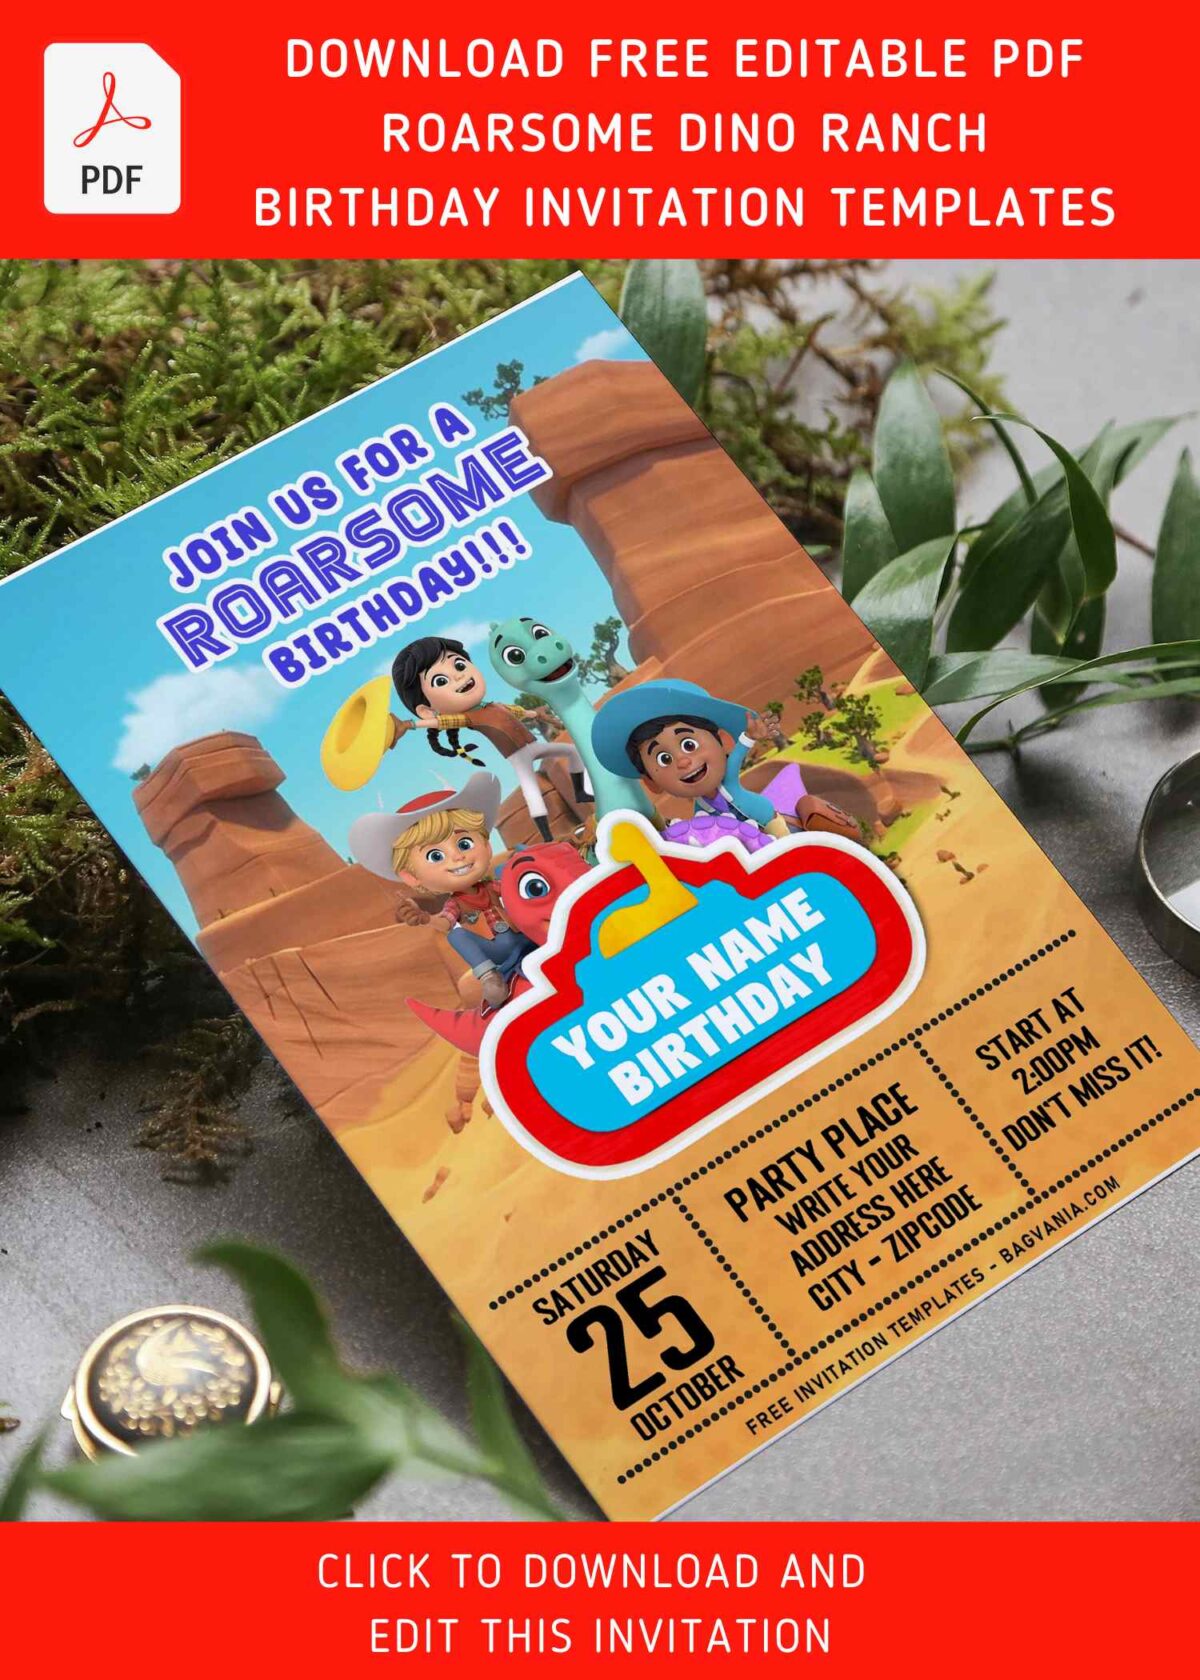 (Free Editable PDF) Meet The Rancher Dino Ranch Themed Birthday Invitation Templates with Miguel and Tango